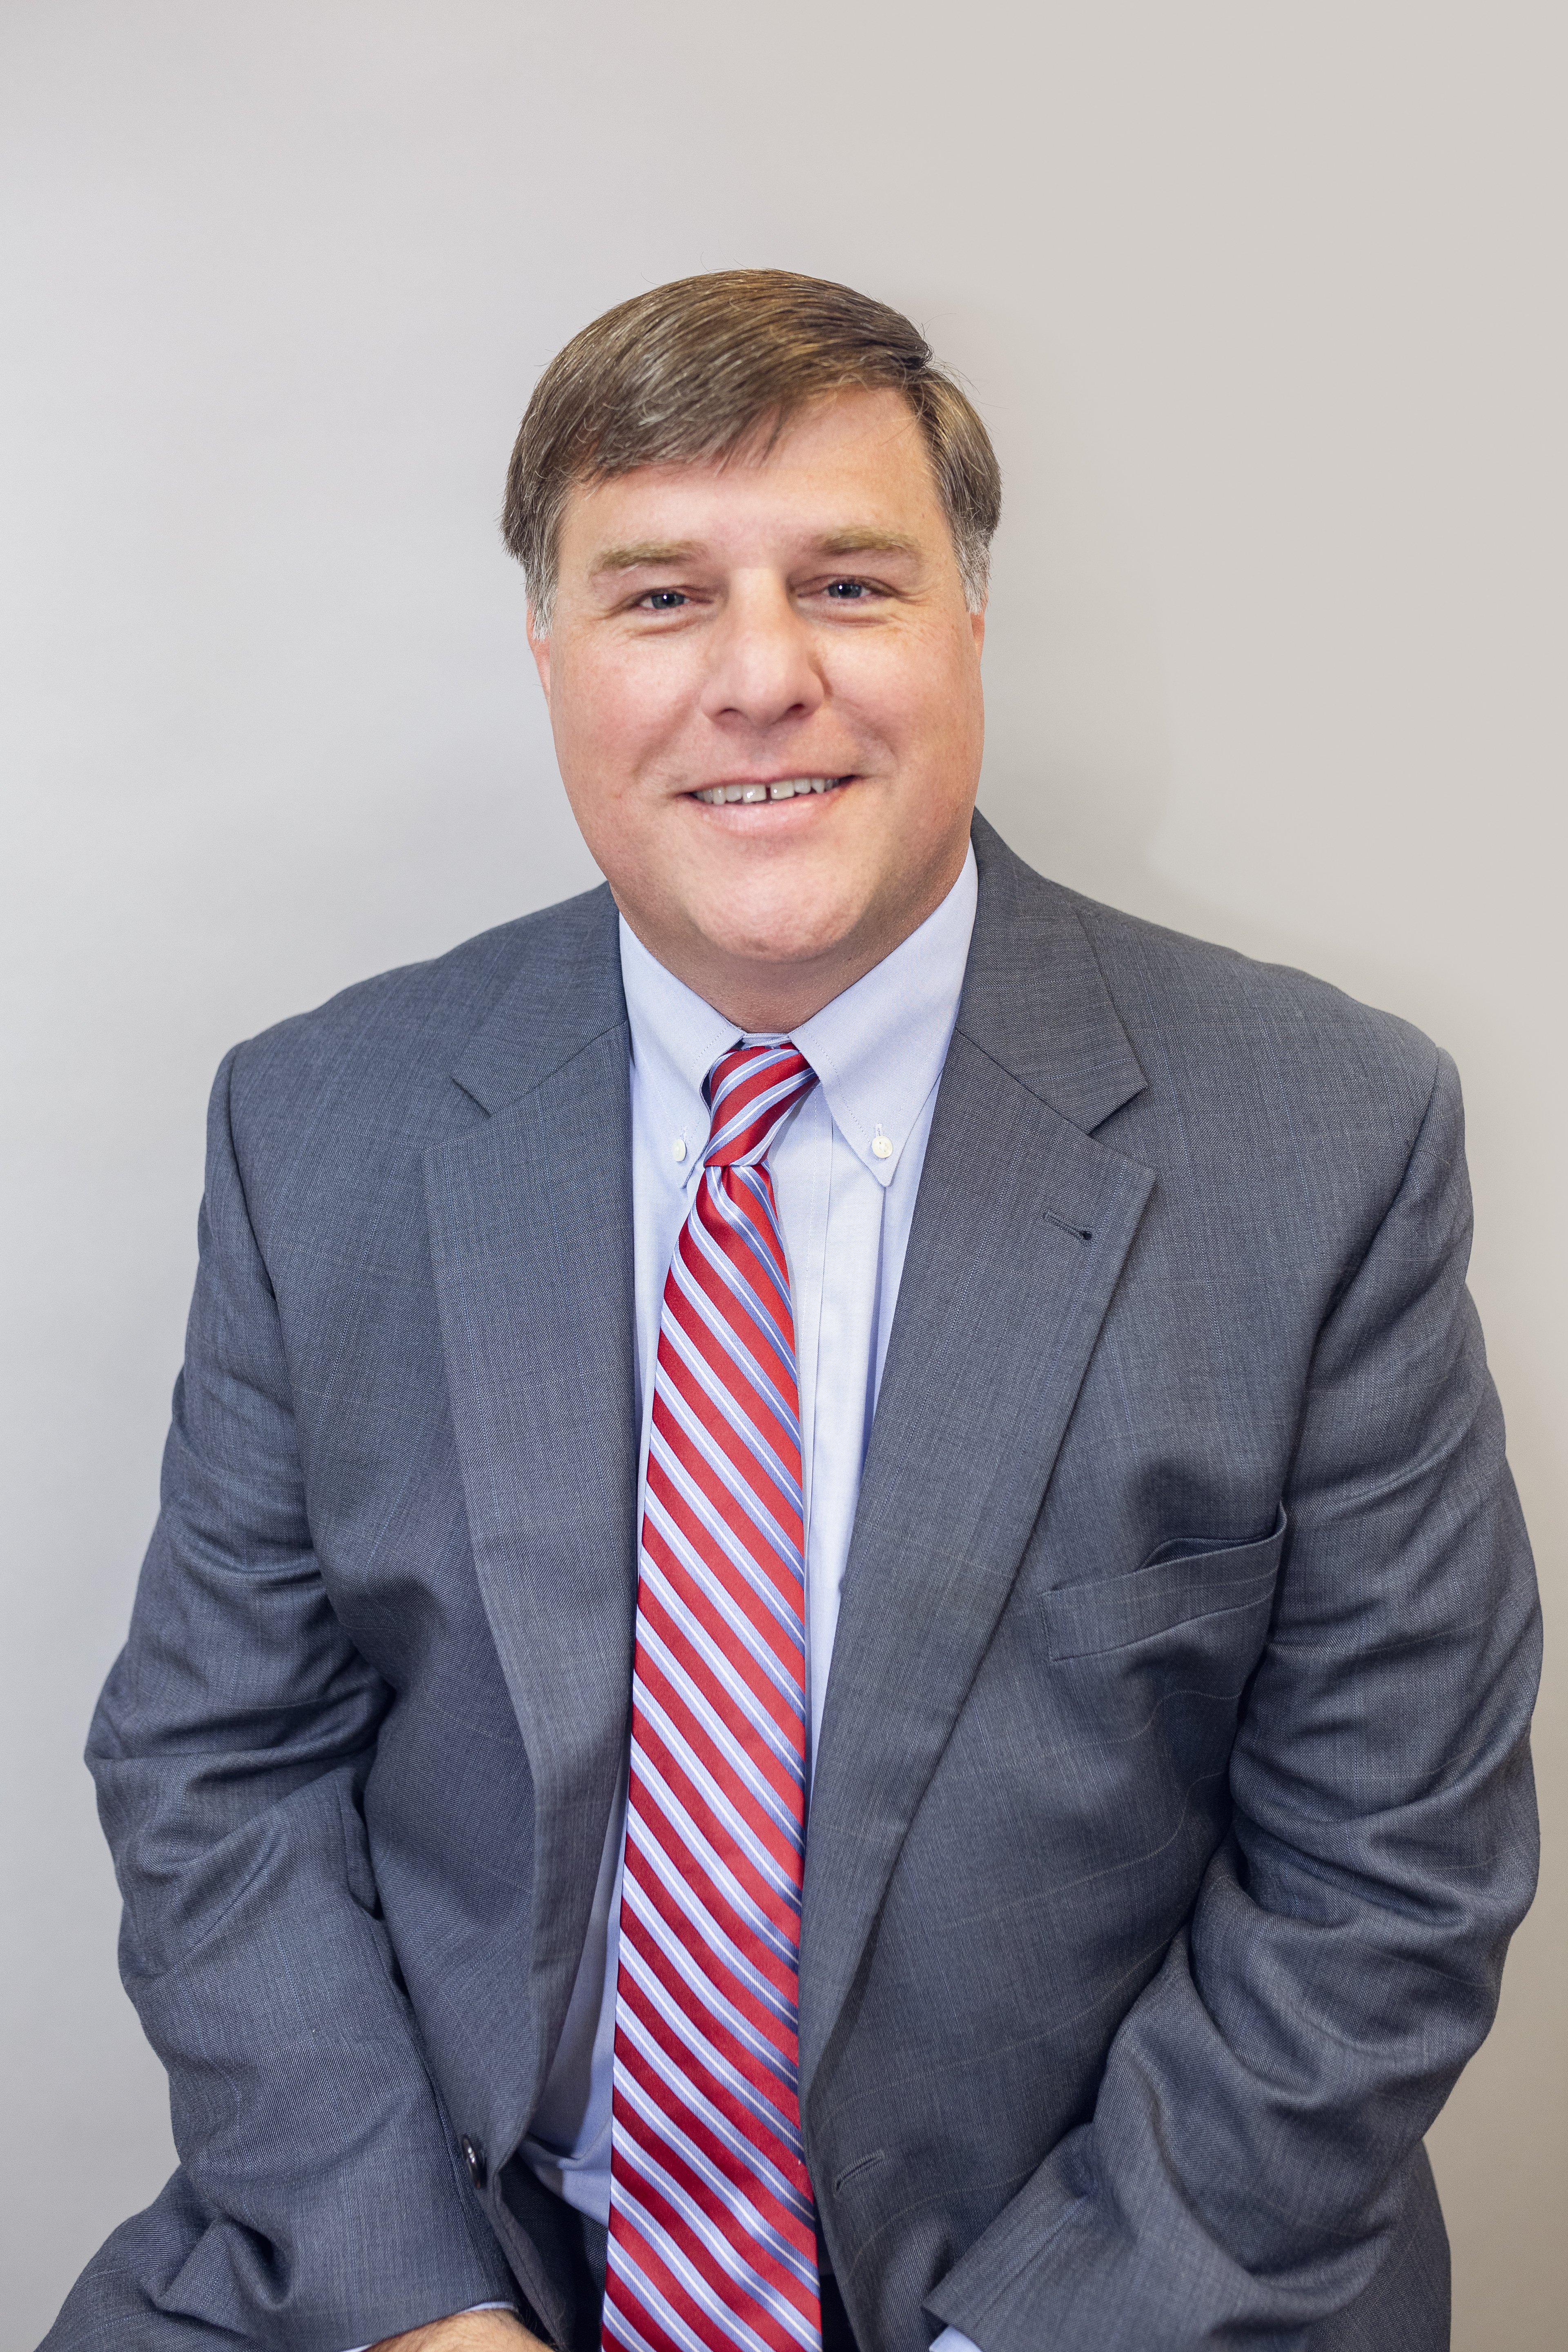 Photo for Eli Tinsley elected to the Board of Directors of Community Bankers Association of Georgia